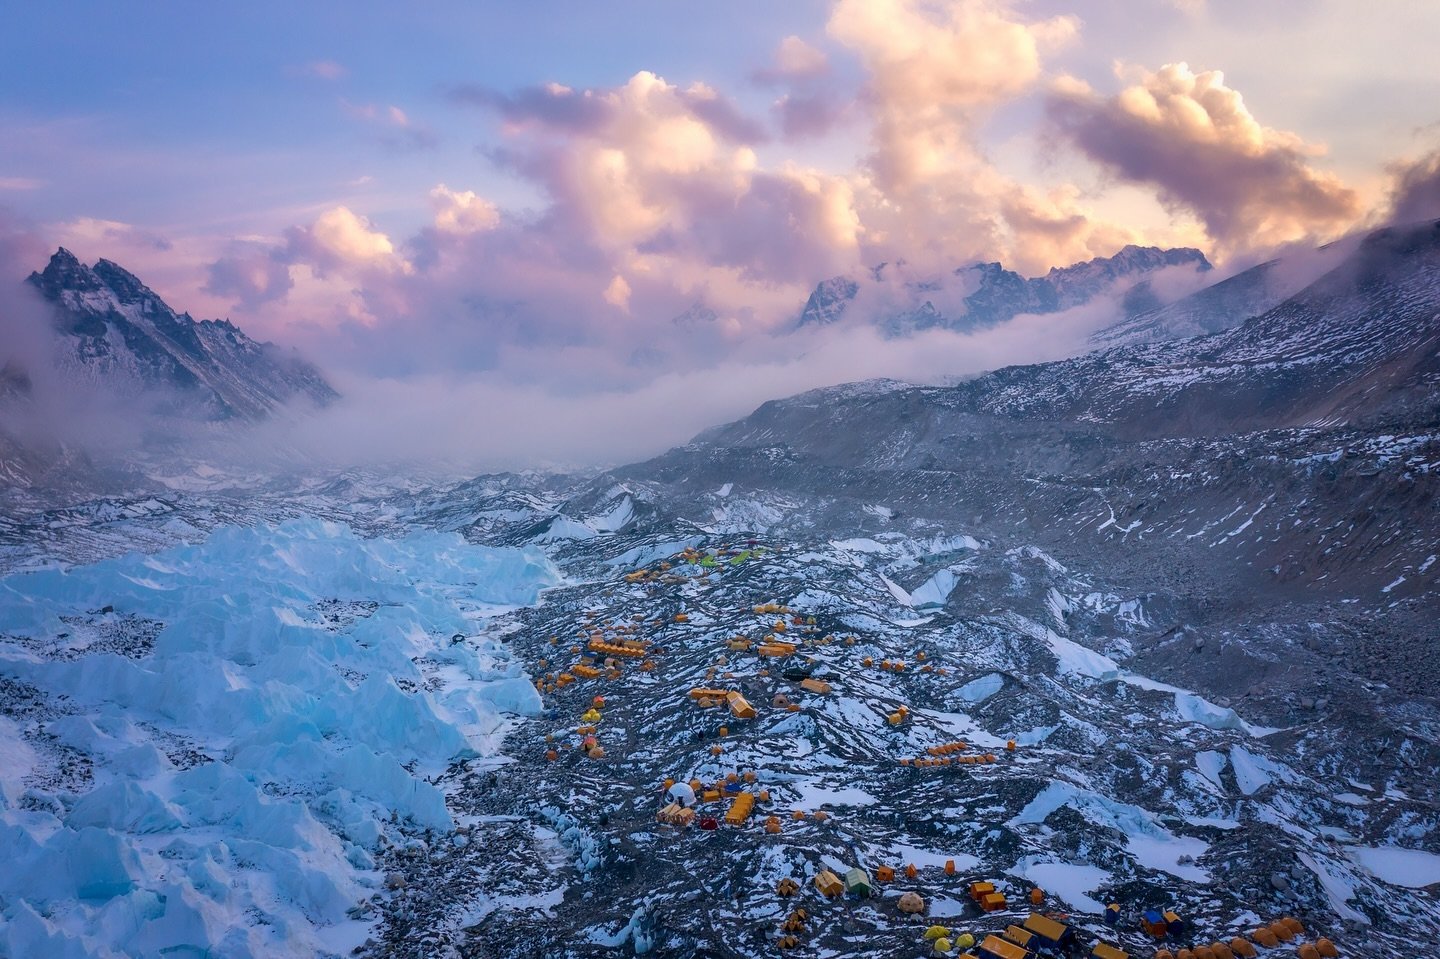 Sunset on Everest Base Camp.
The Khumbu is really a river.

#sunset #everest #basecamp #goldenhour #mountains  #ice #khumbuicefall